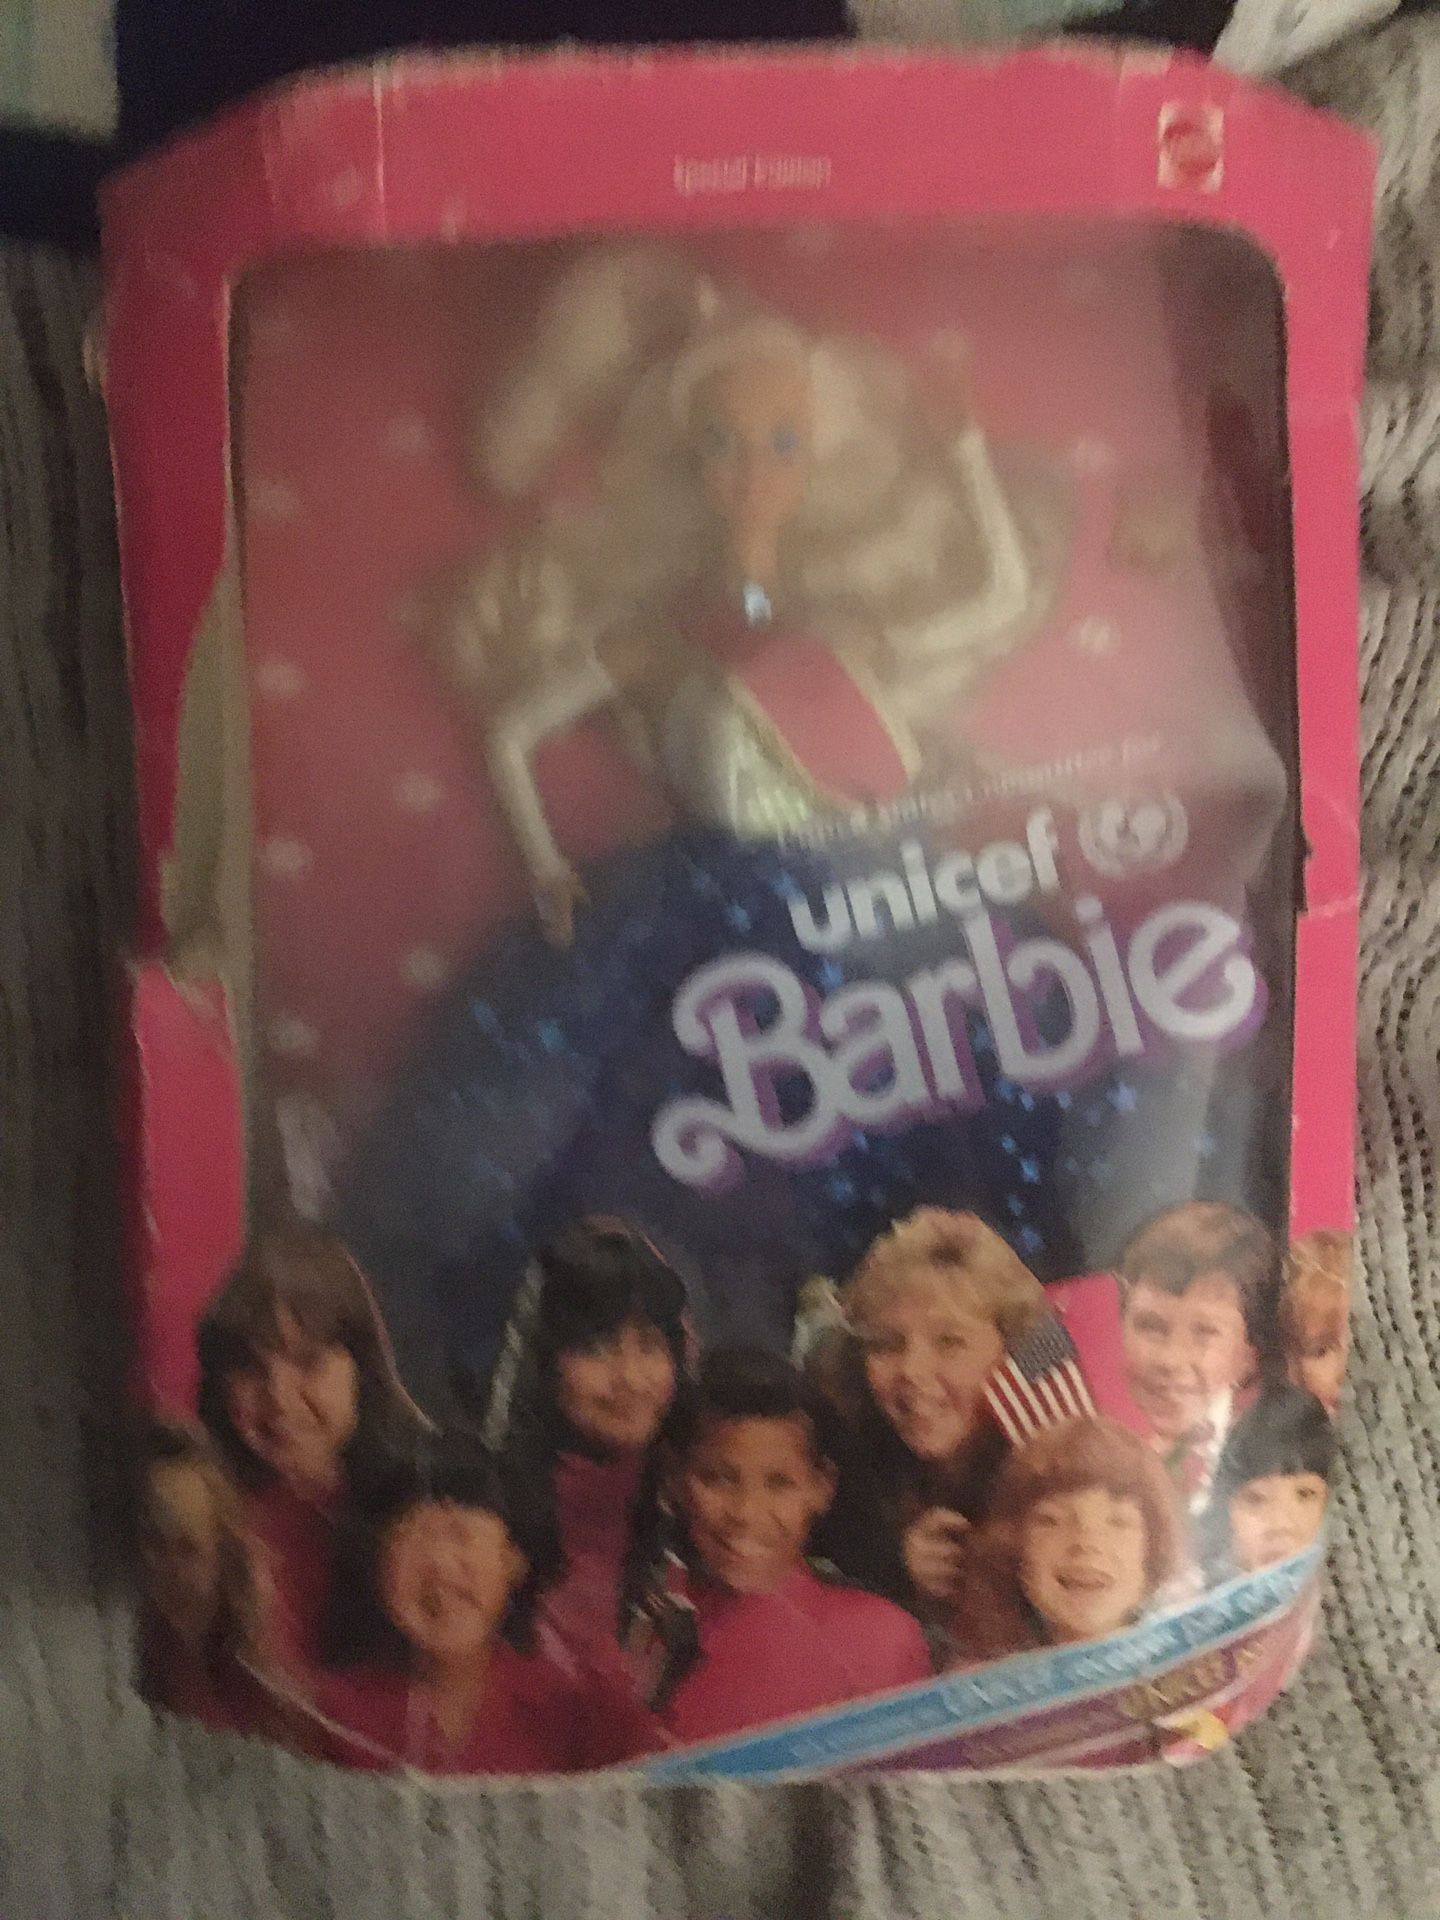 Collectible Barbie Doll Unicef Inbox Only $30 Firm